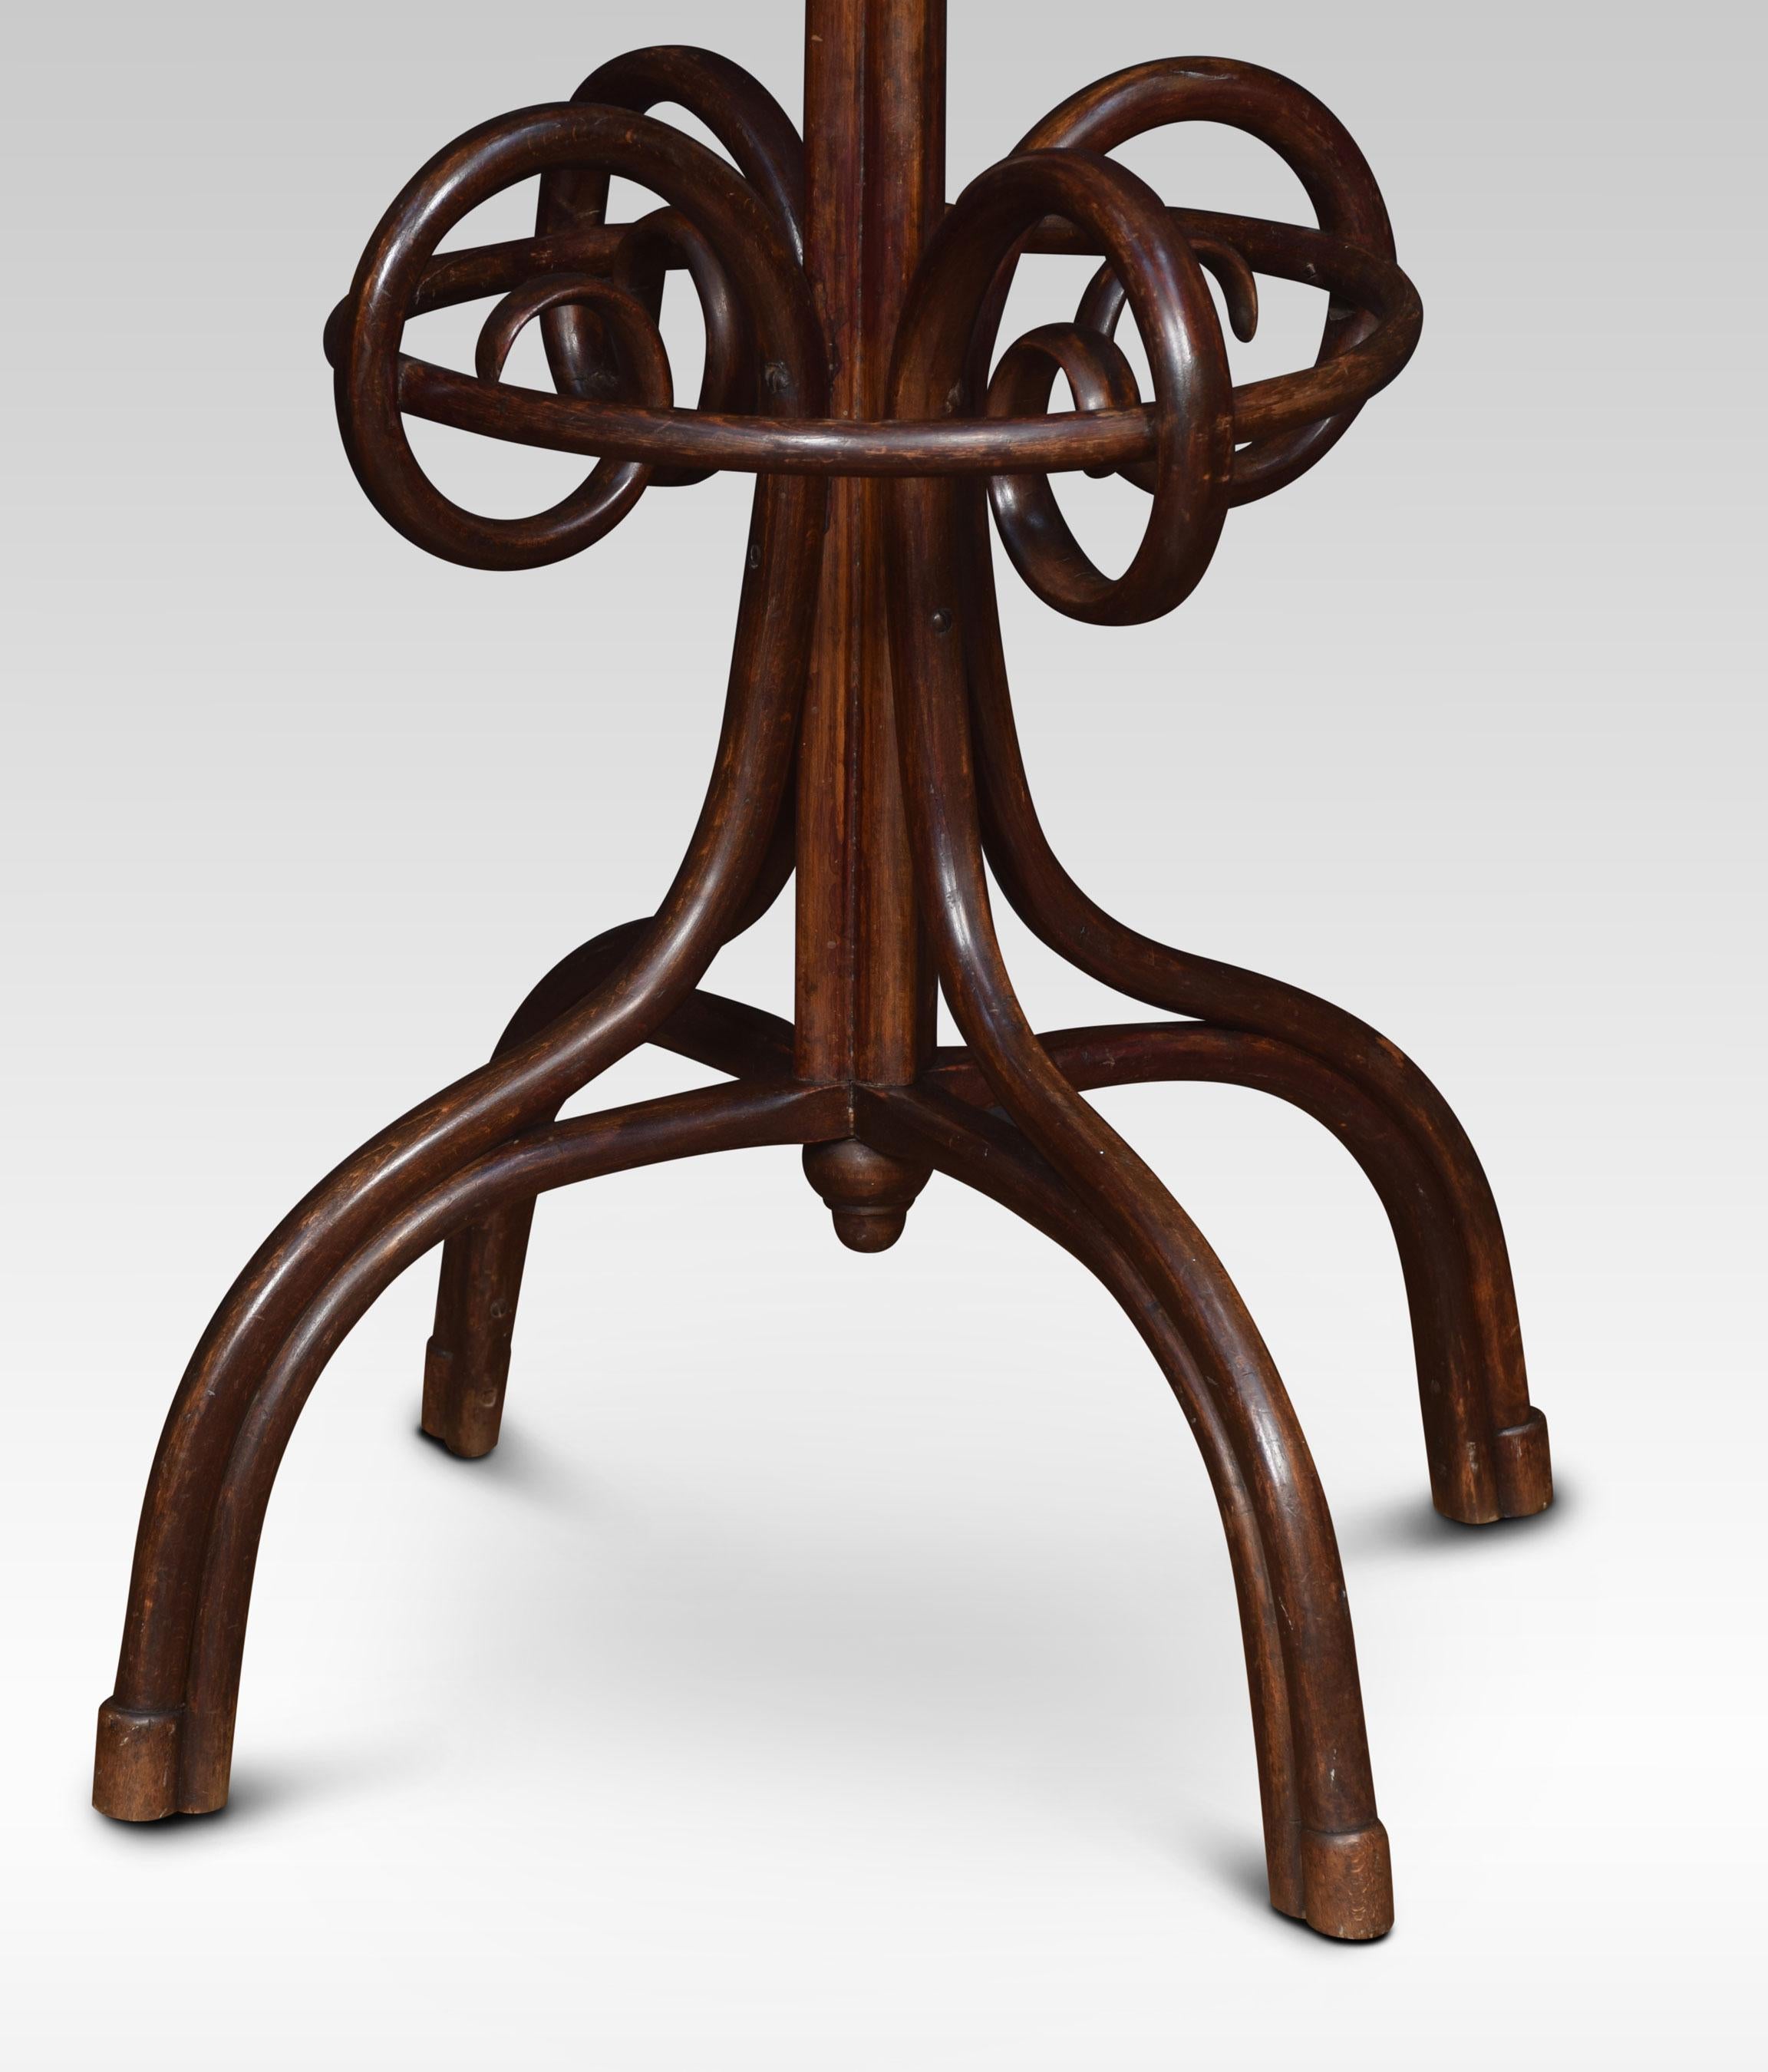 Late 19th-century bentwood hall or hat stand. The top section having shaped supports above the large central column to the base having four similar shaped supports
Dimensions:
Height 77 inches
Width 21.5 inches
Depth 21.5 inches.